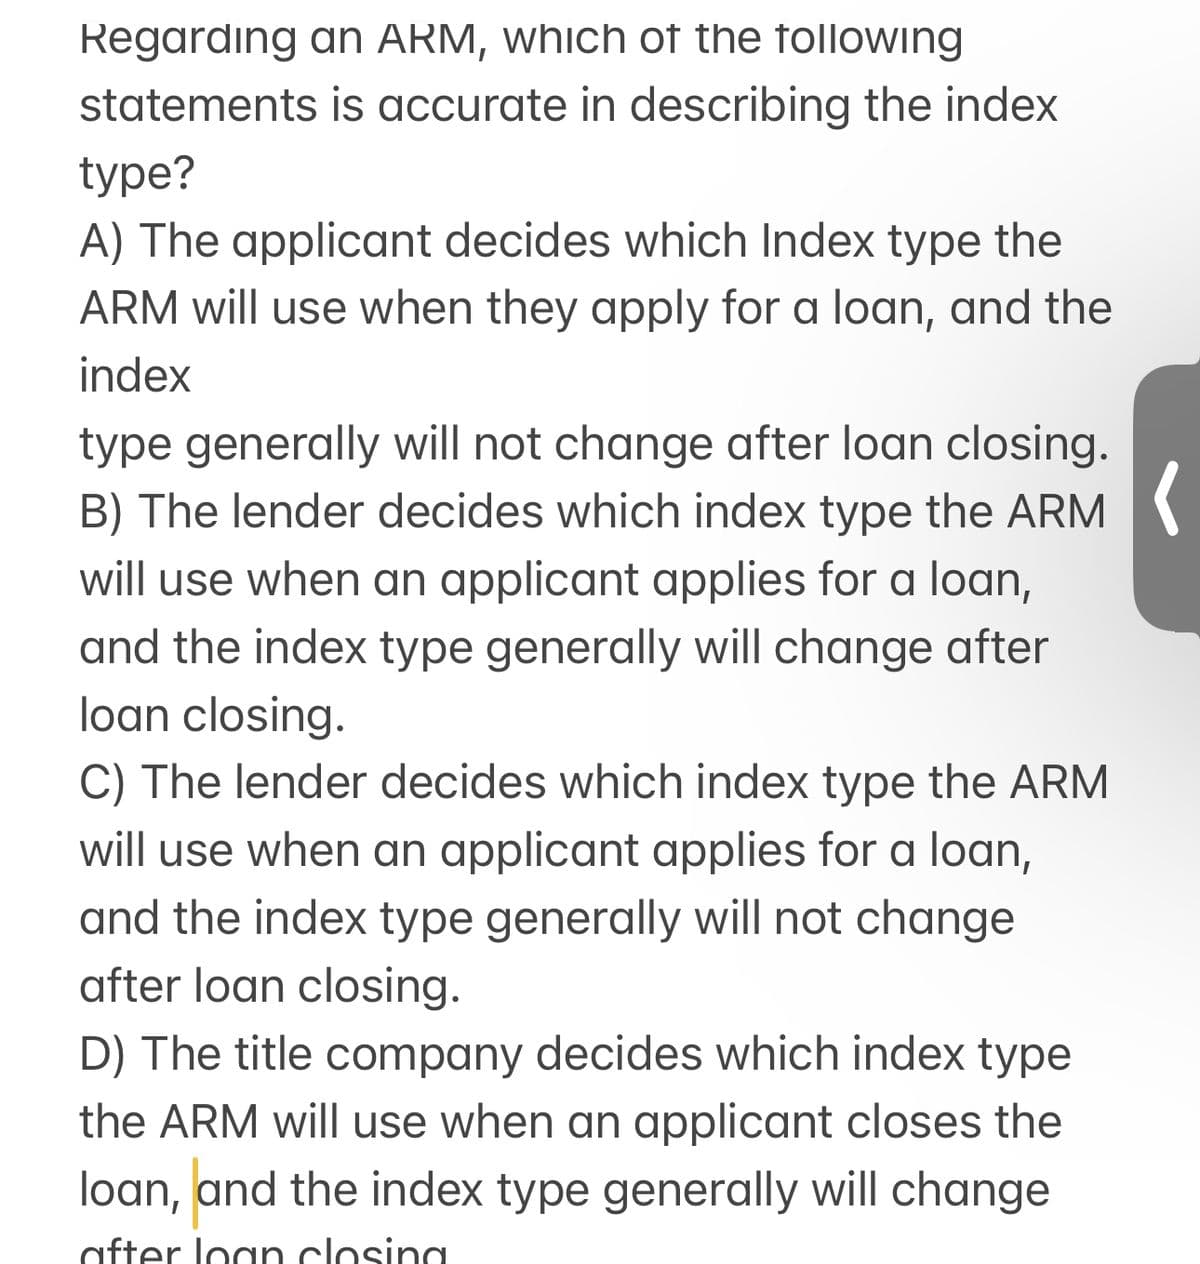 Regarding an ARM, which of the following
statements is accurate in describing the index
type?
A) The applicant decides which Index type the
ARM will use when they apply for a loan, and the
index
type generally will not change after loan closing.
B) The lender decides which index type the ARM
will use when an applicant applies for a loan,
and the index type generally will change after
loan closing.
C) The lender decides which index type the ARM
will use when an applicant applies for a loan,
and the index type generally will not change
after loan closing.
D) The title company decides which index type
the ARM will use when an applicant closes the
loan, and the index type generally will change
after loan closing